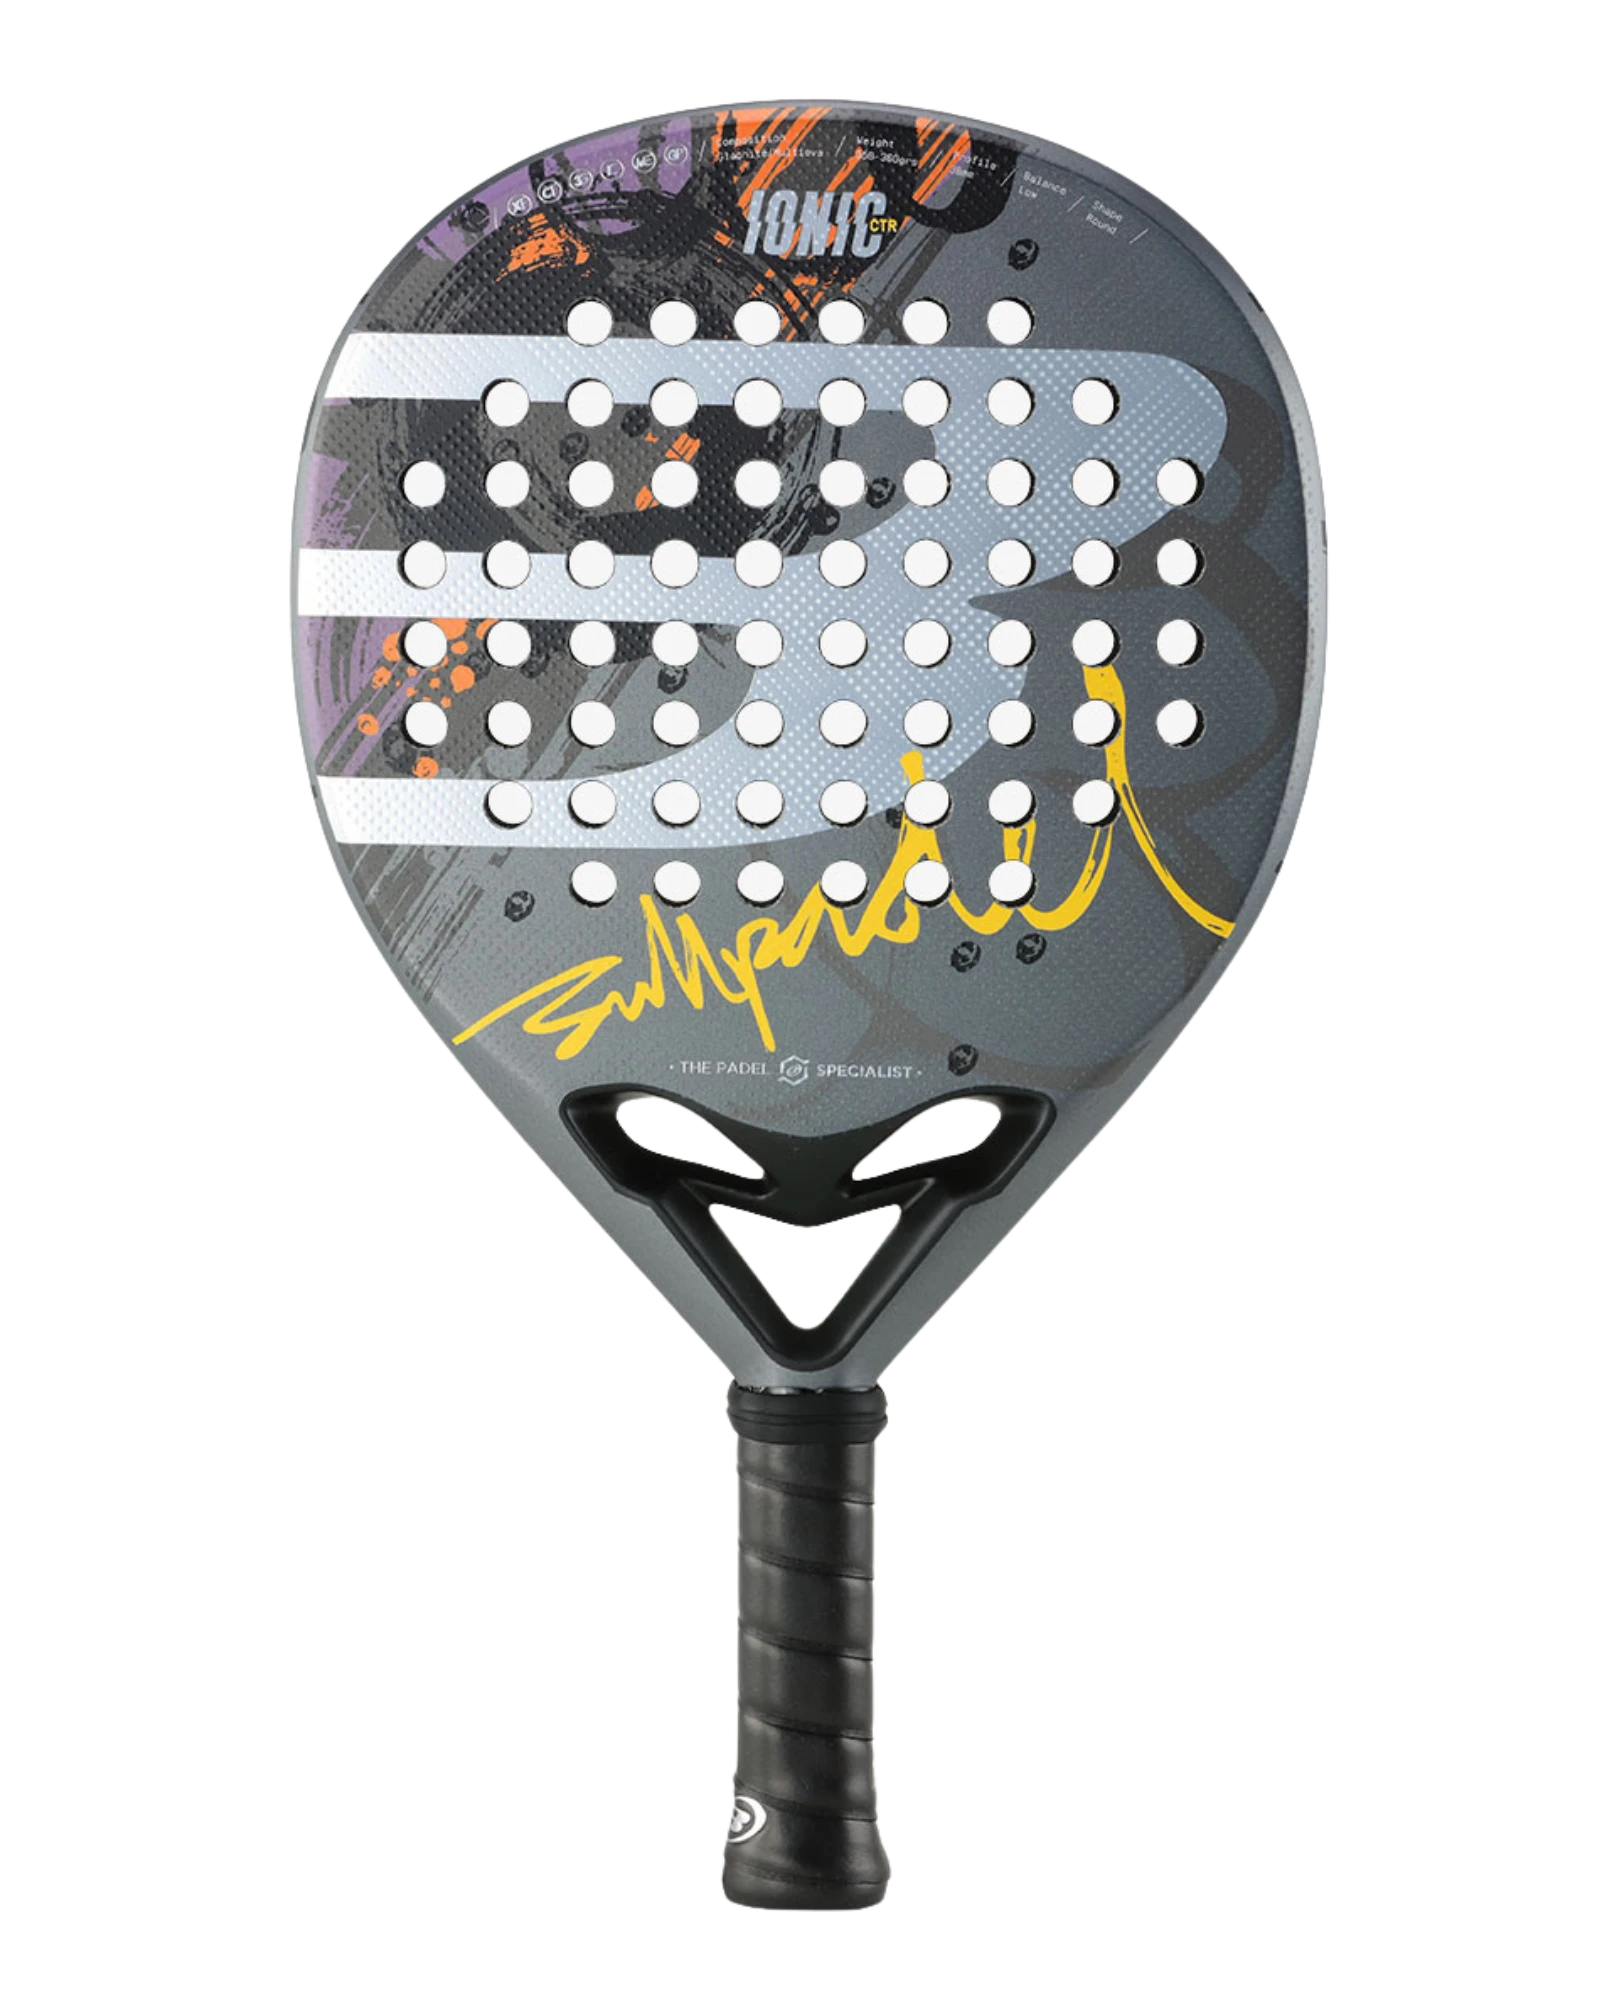 Best Bullpadel Padel Rackets Online for all Levels Players - Padel USA